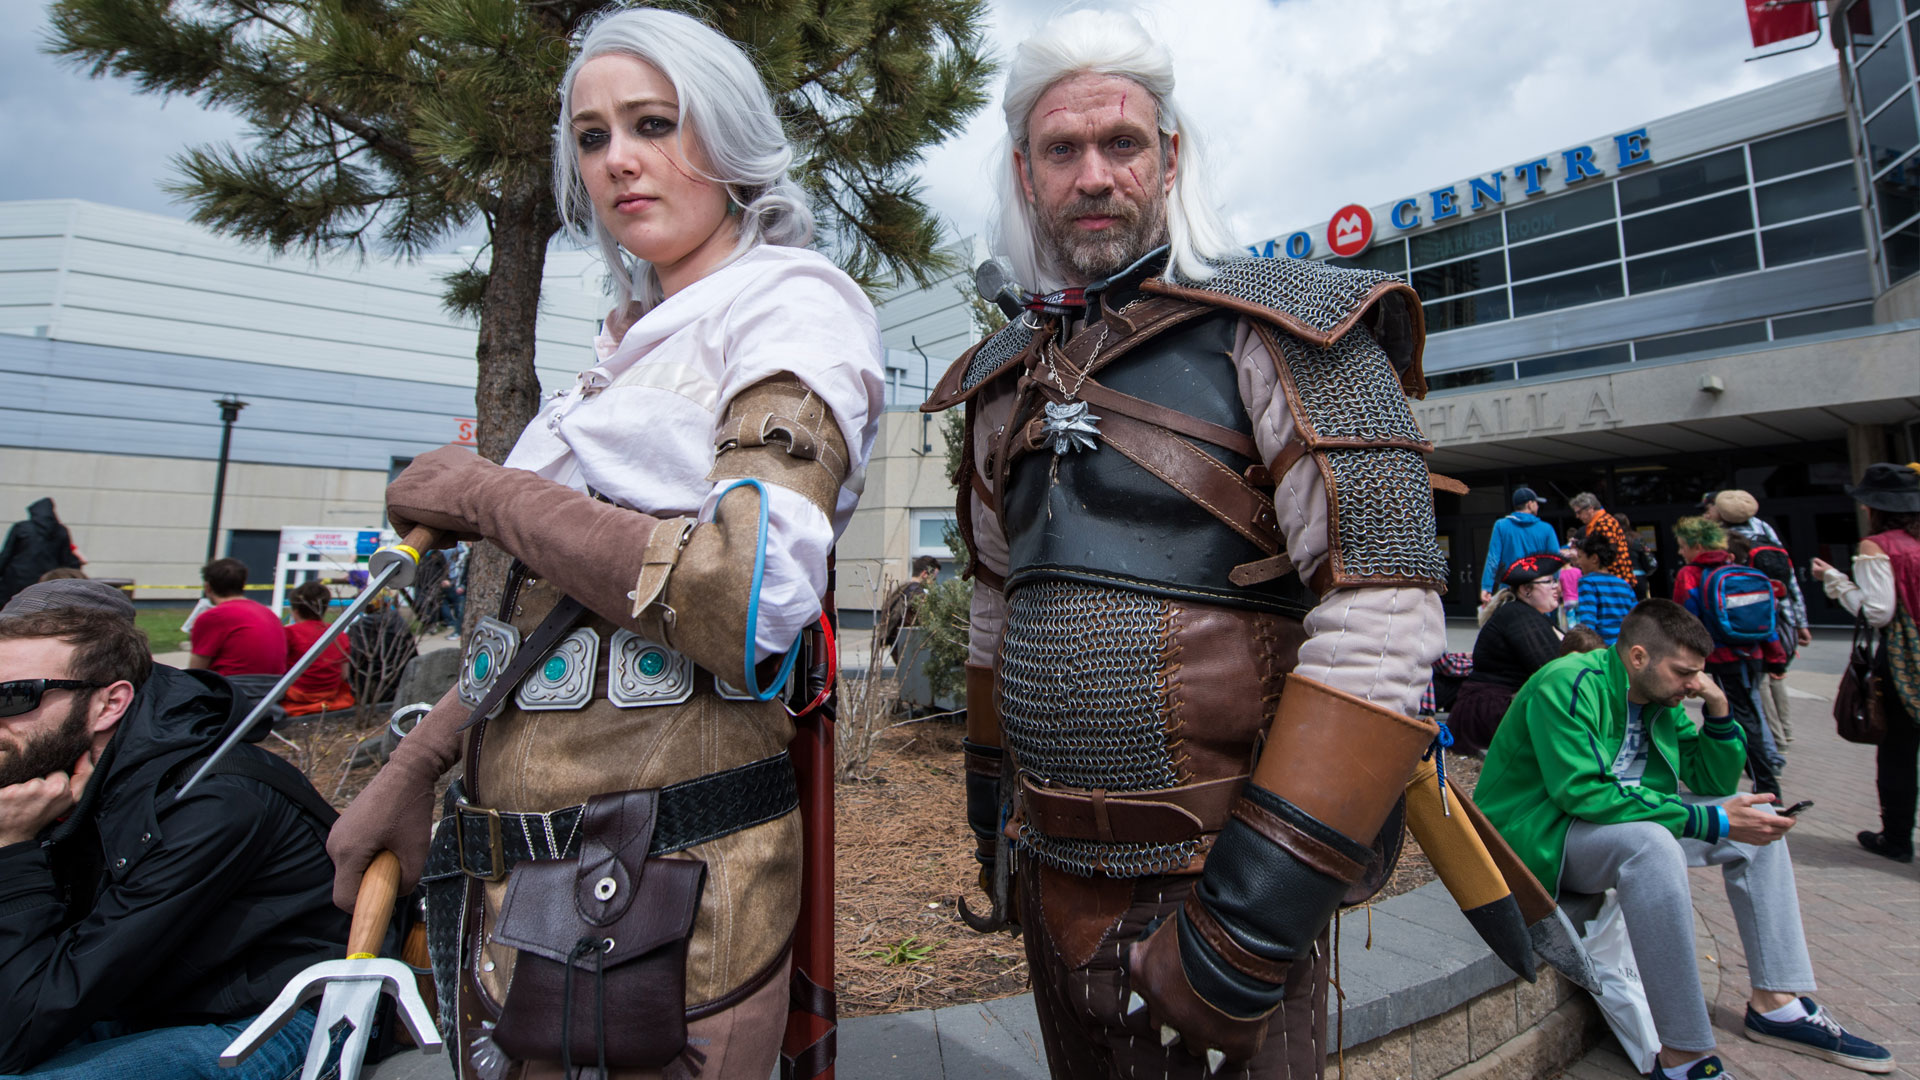 Calgary Expo 2017 Cosplay Day 4 The Witcher Geralt and Ciri